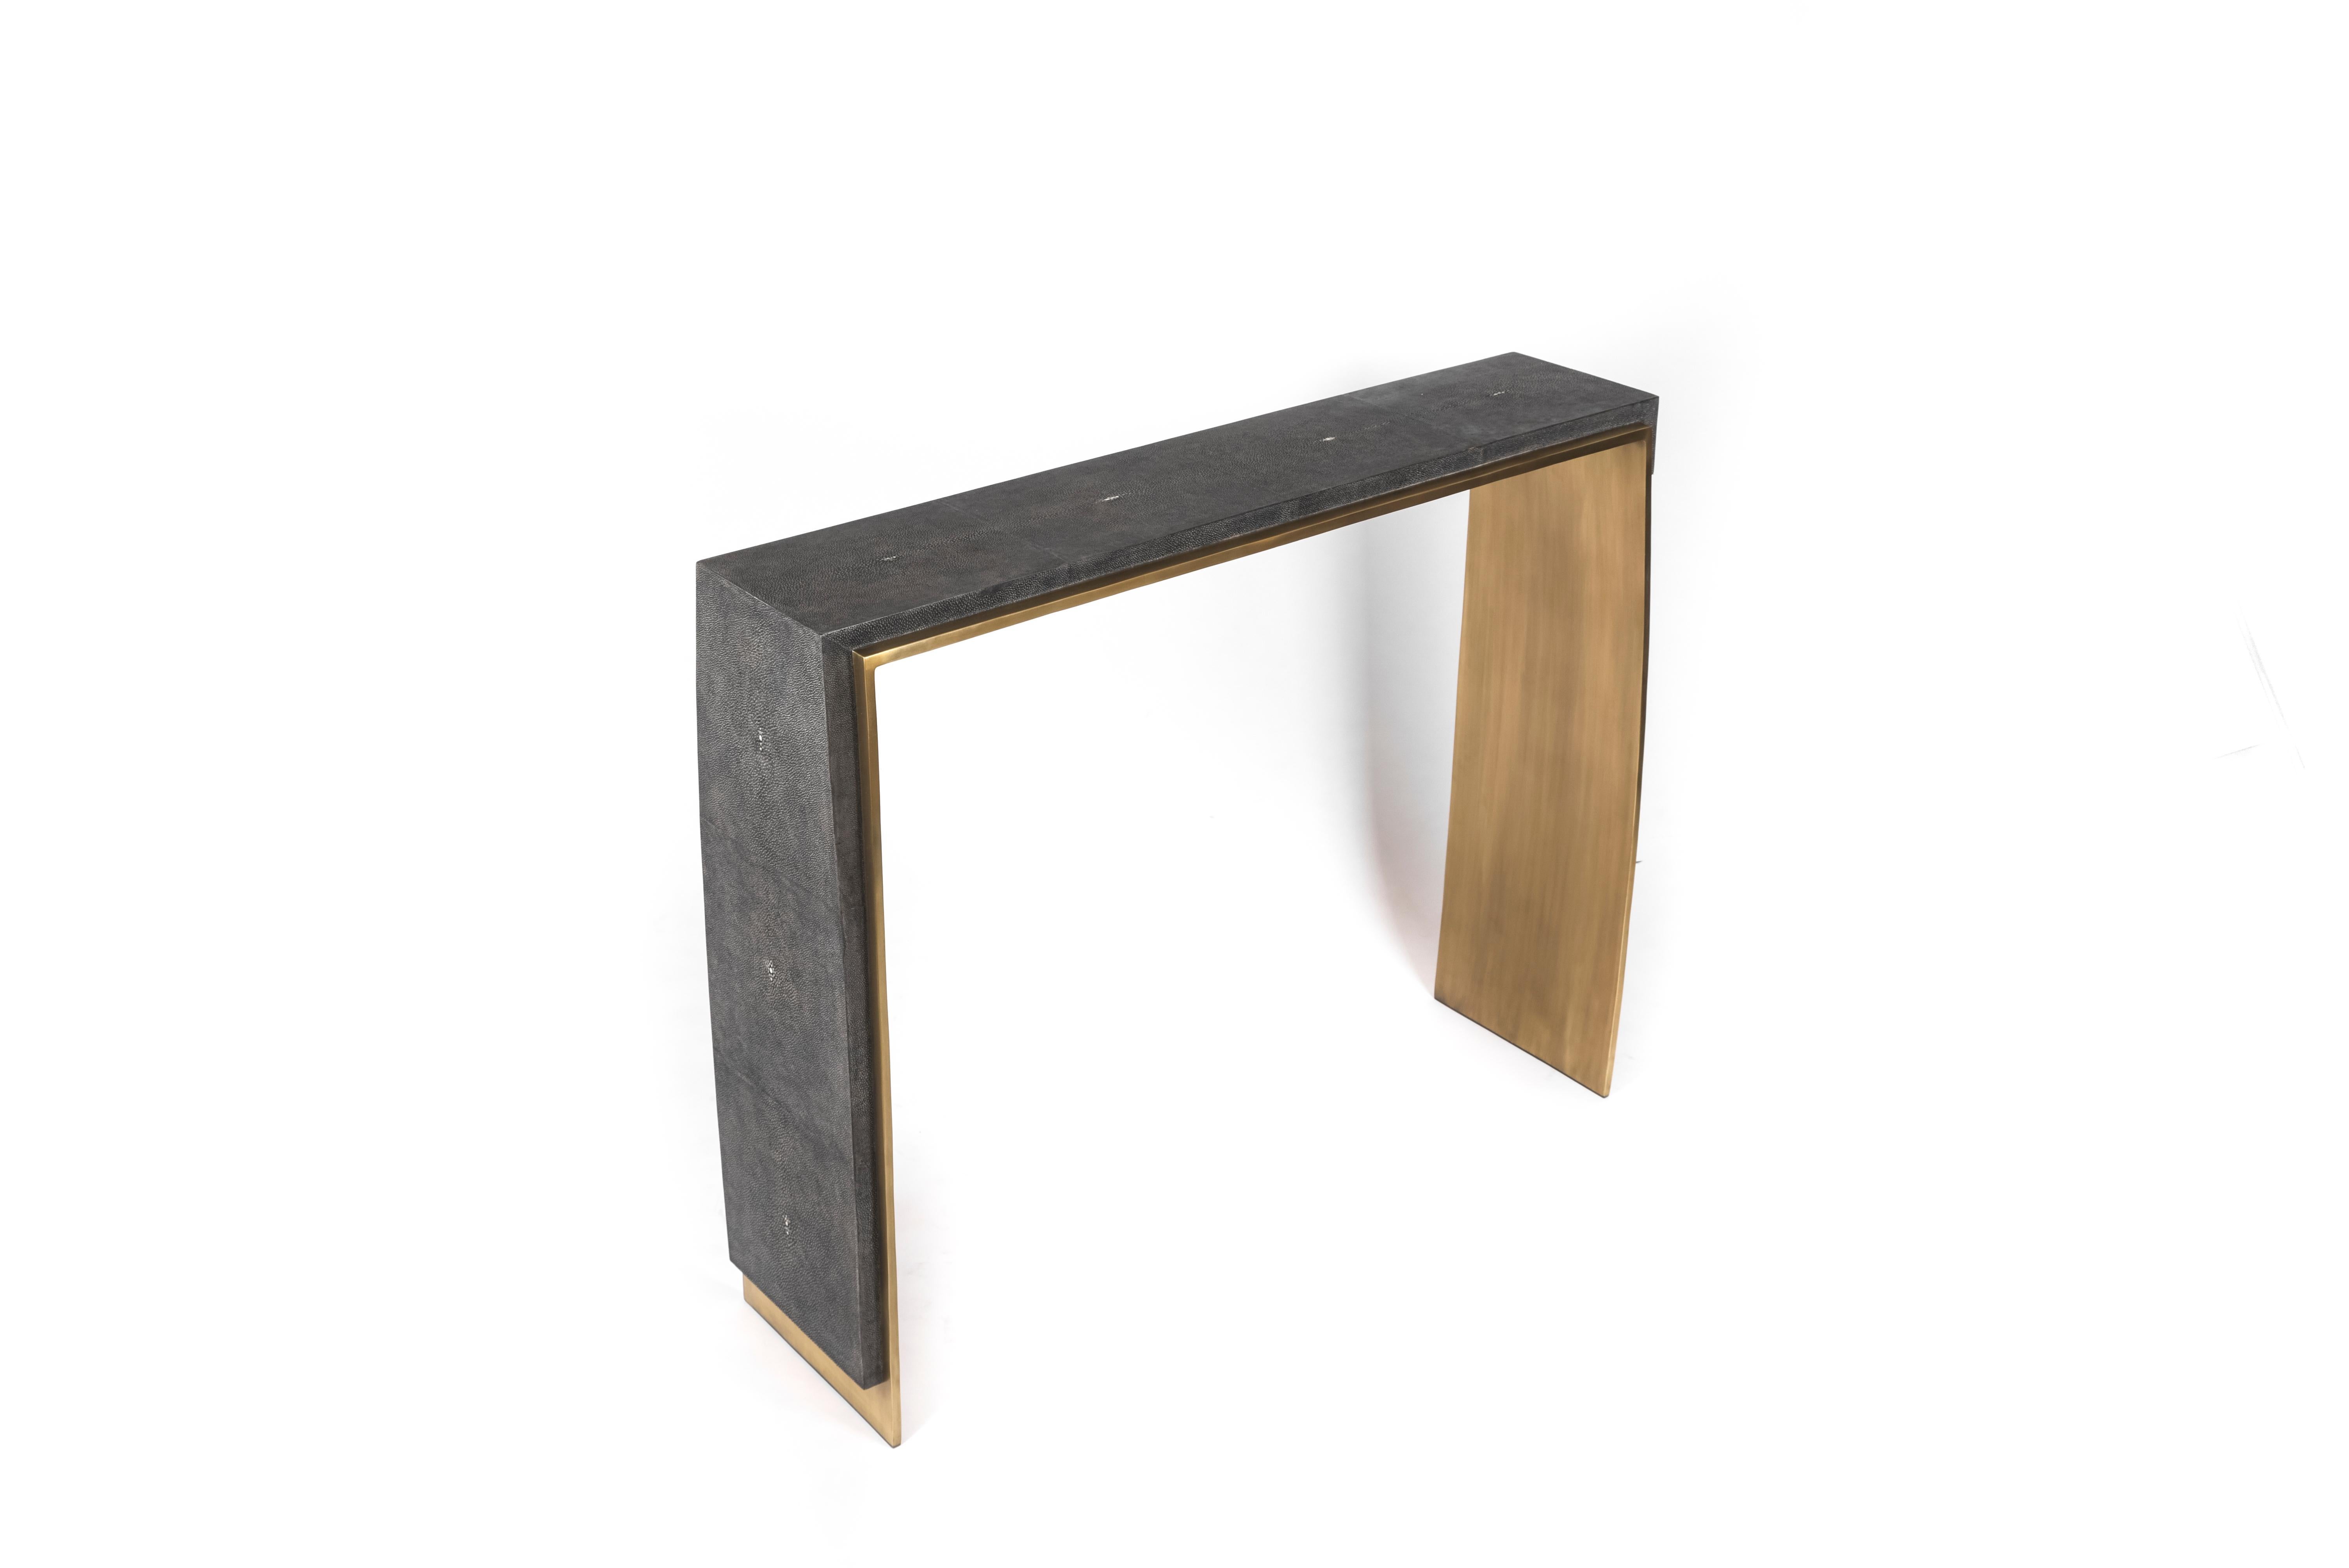 The Laurens console is both graphic and Minimalist with it’s asymmetry overlay of coal black shagreen sitting on top of a bronze-patina brass structure. This piece can work in every space: a living room or in an entrance hall to make a statement.